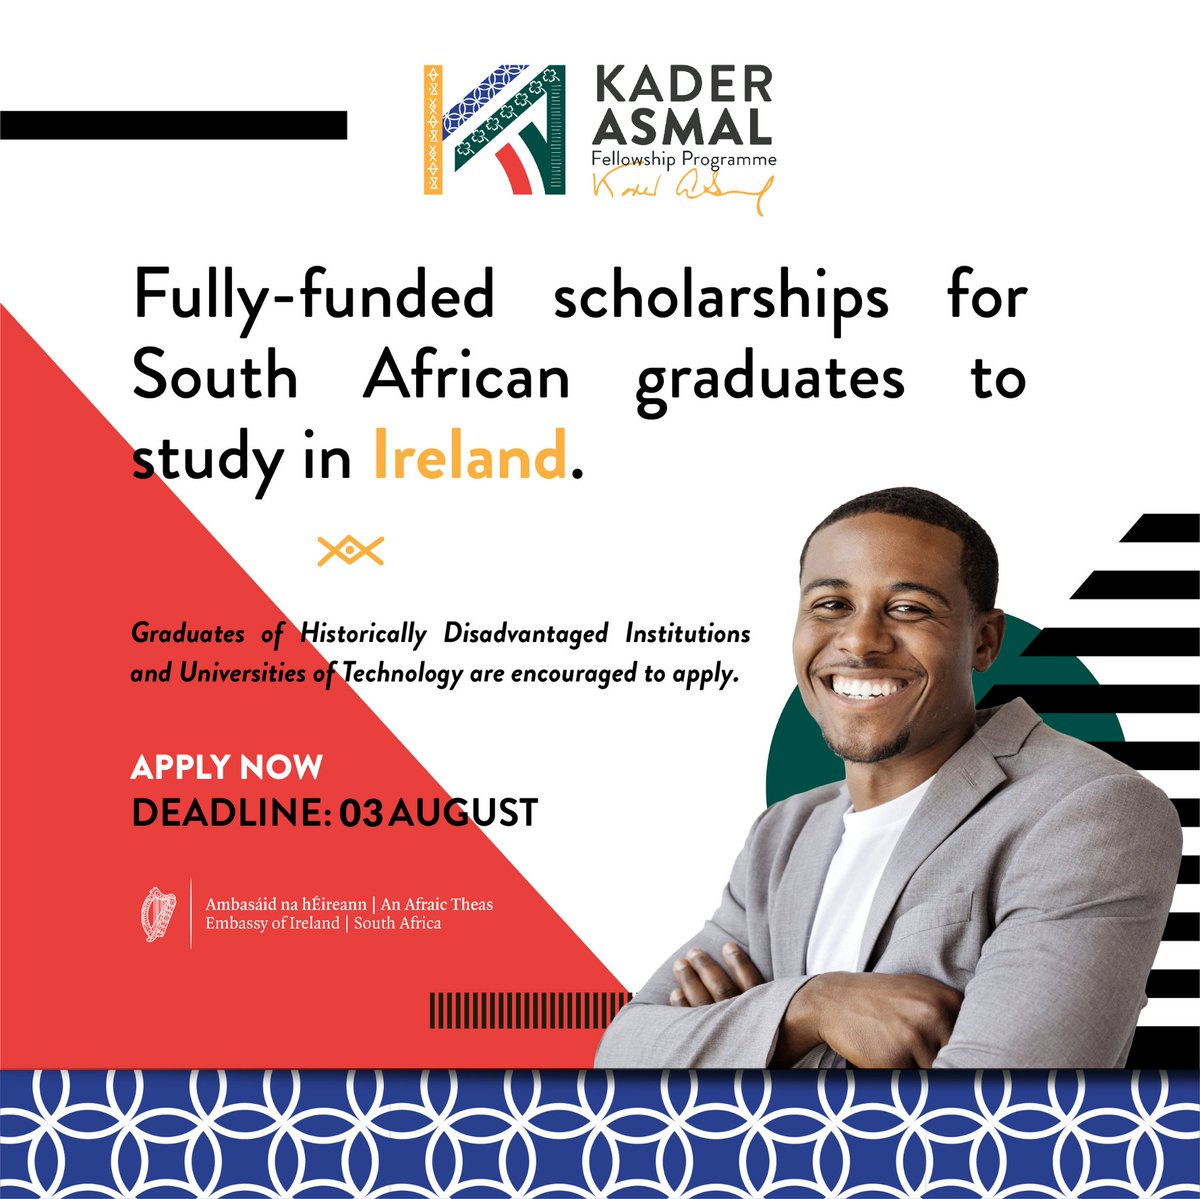 The Kader Asmal Fellowship Programme is a fully-funded scholarship for students from 🇿🇦 who show leadership potential to develop their skills & knowledge. Find out if you could become one of our fellows in 2023. Apply now: bit.ly/3am44bY #Opportunity #StudyInIreland